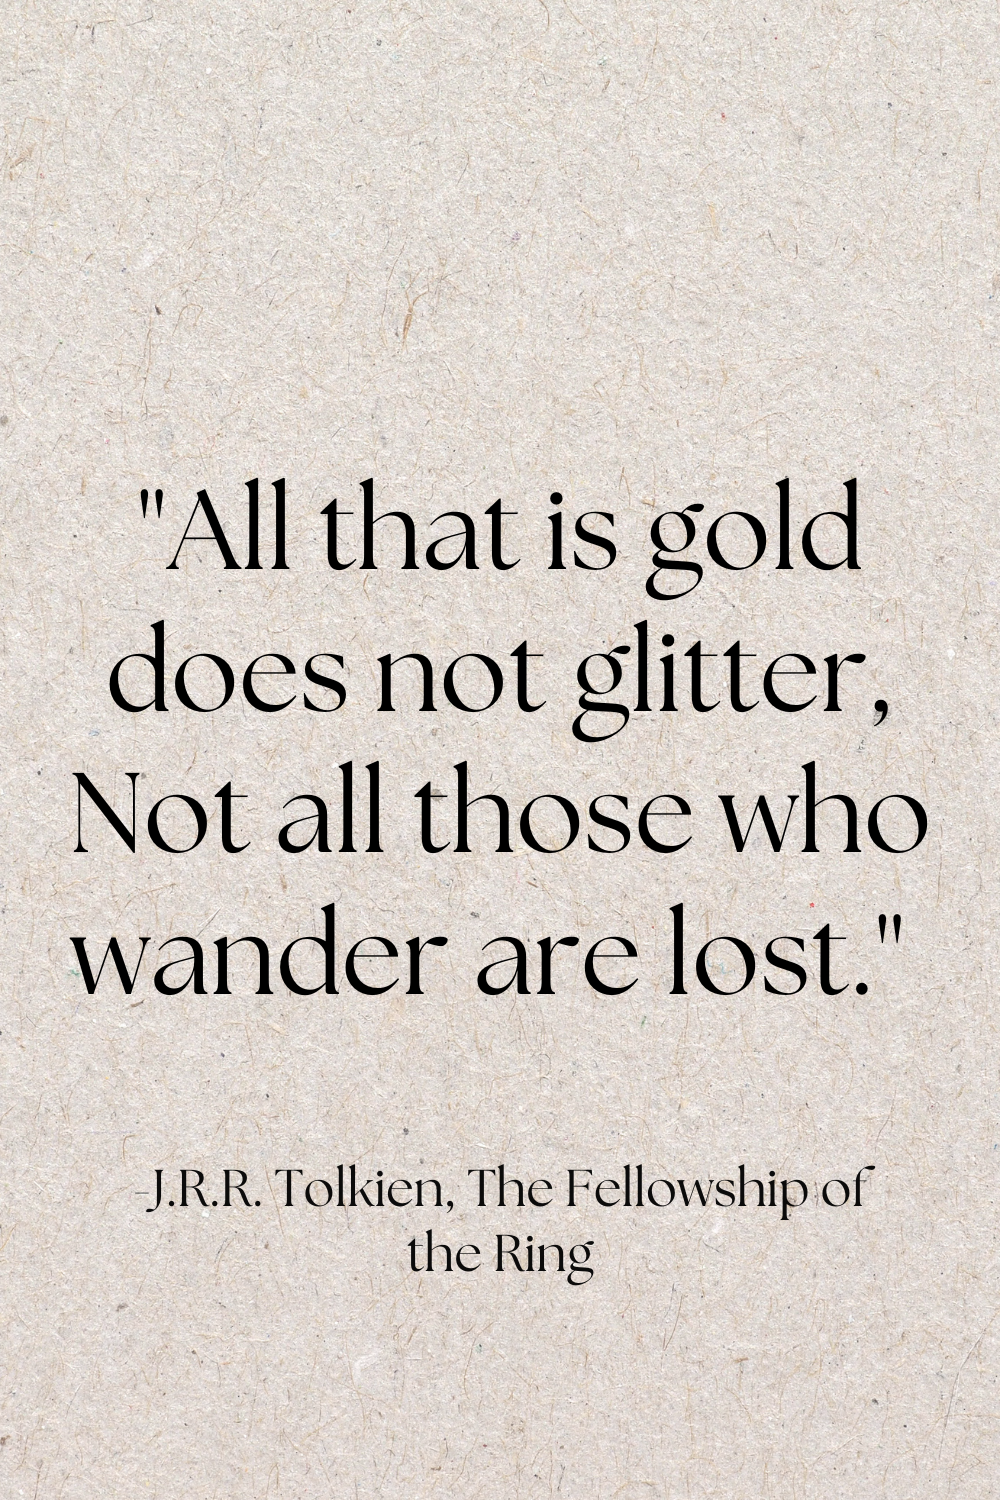 "All that is gold does not glitter, Not all those who wander are lost." - The Fellowship of the Ring